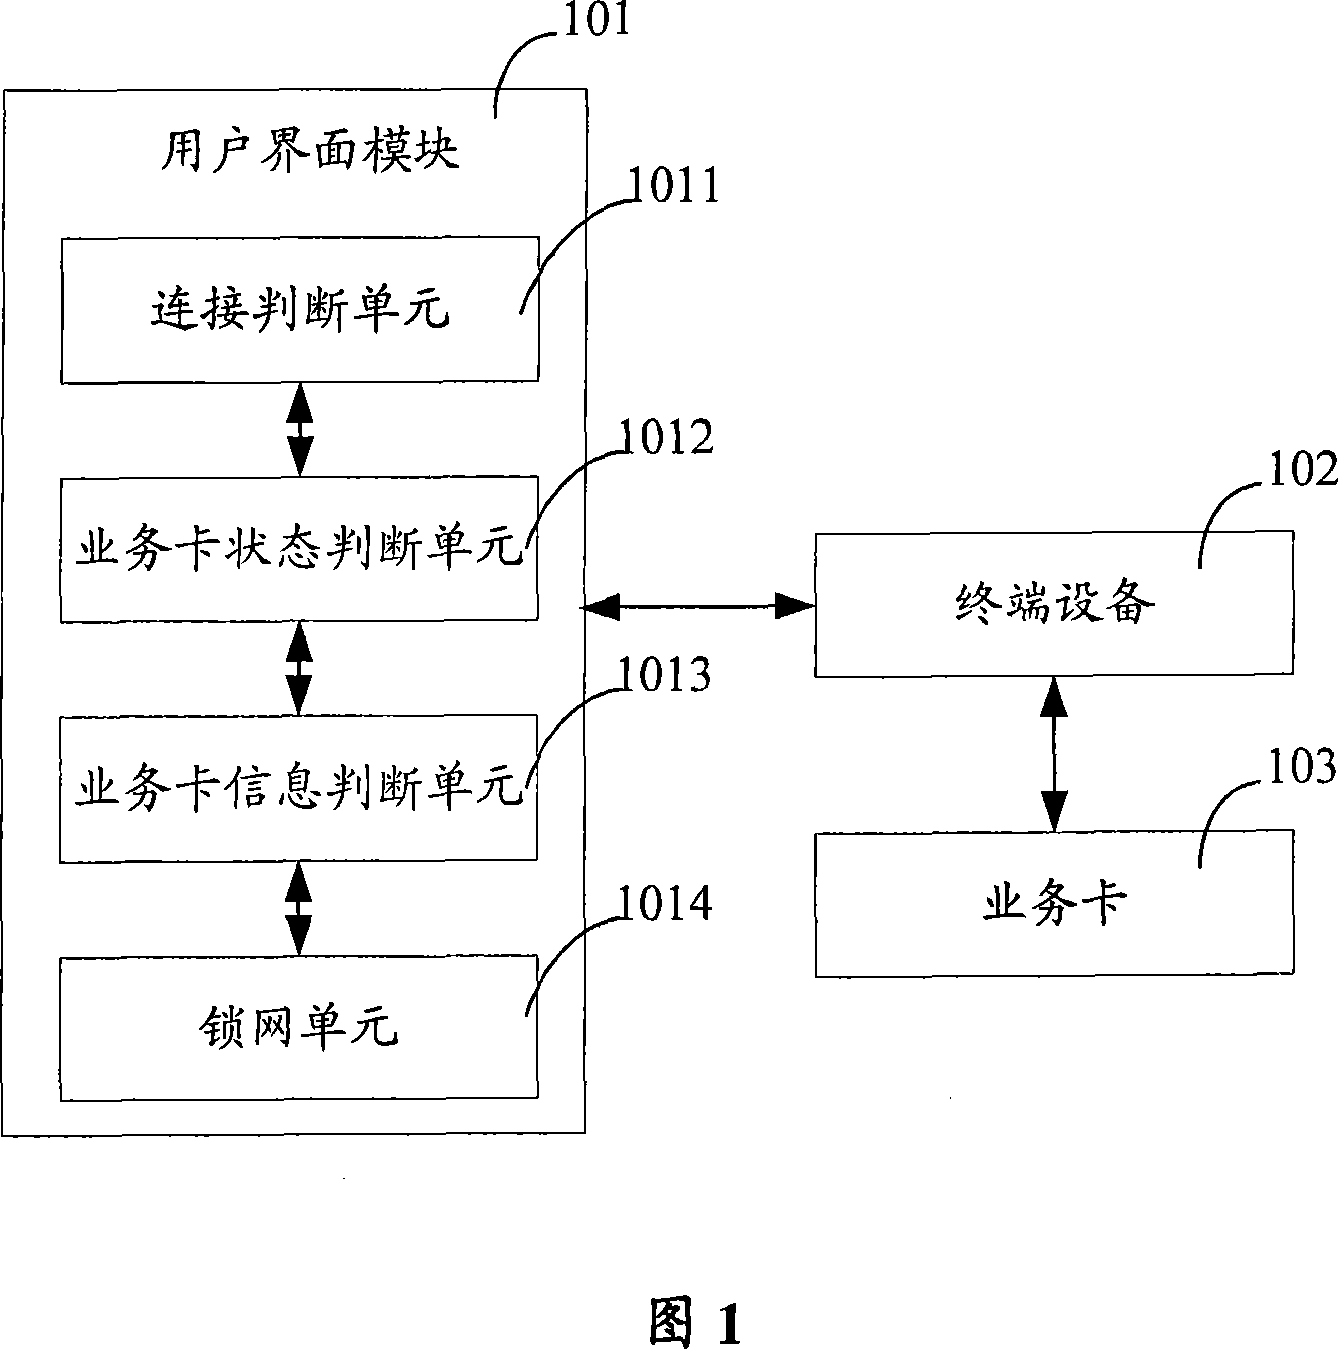 Method and apparatus for implementing terminal network locking